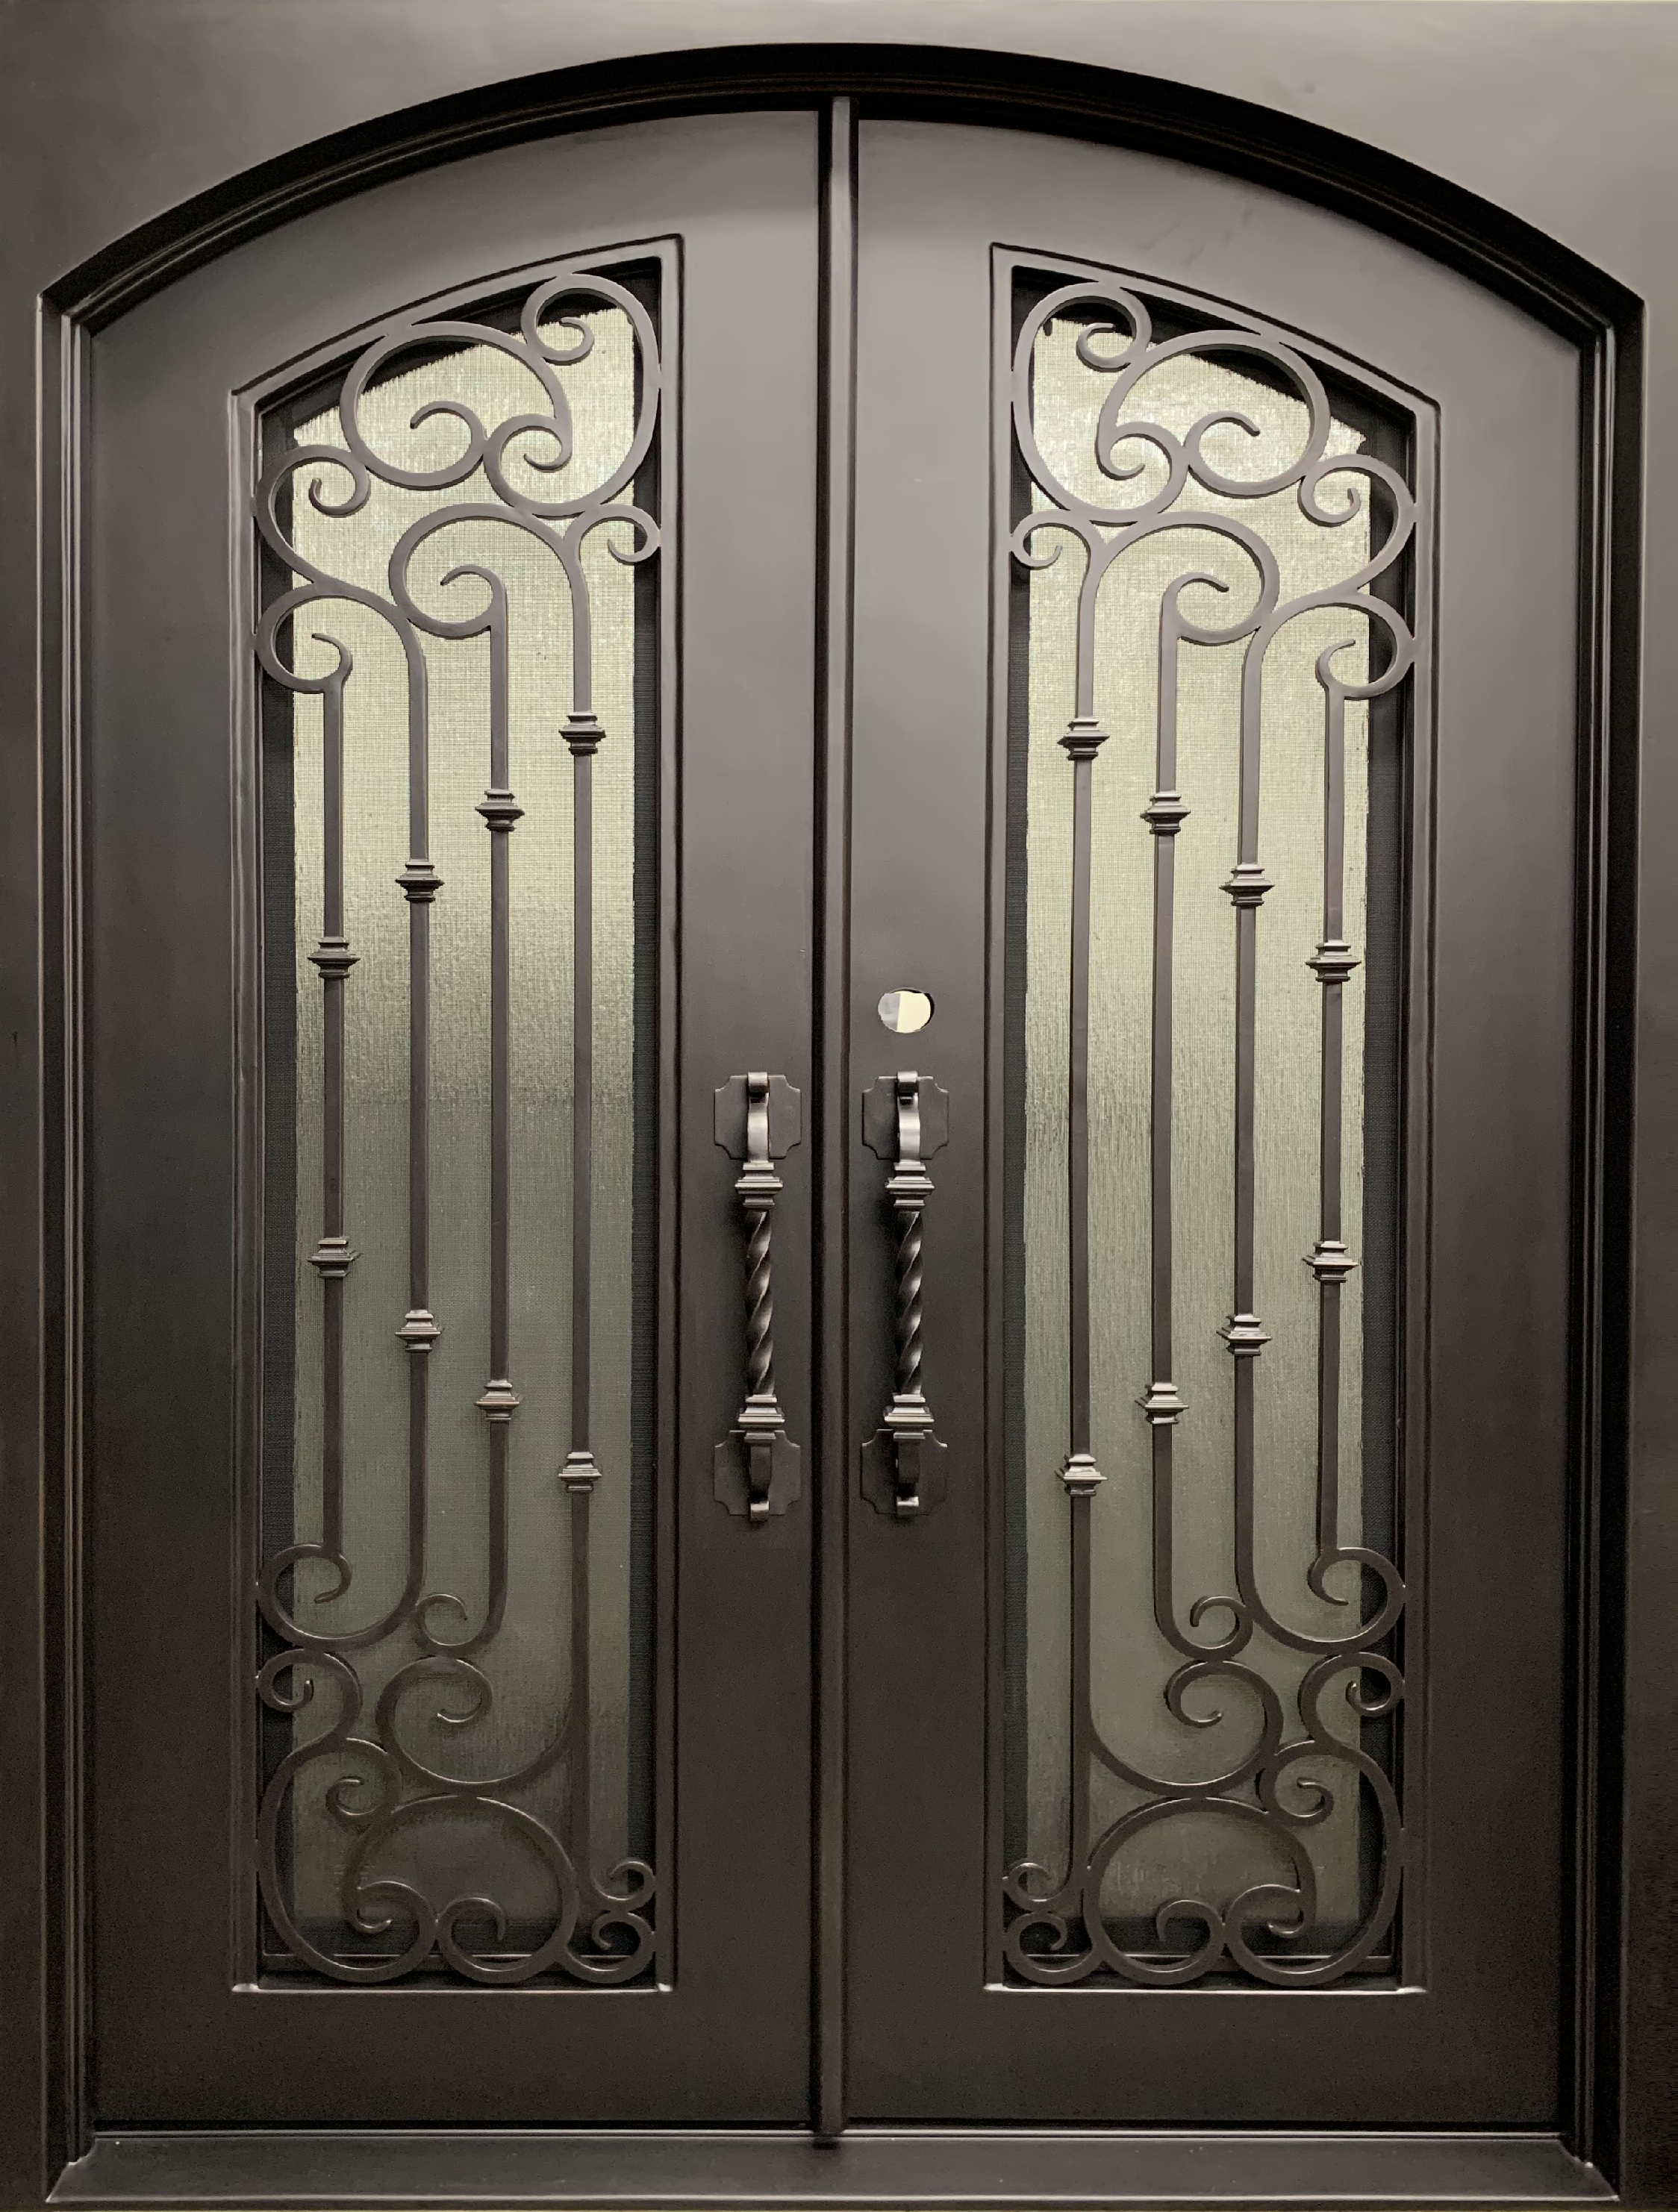 DAHLIA straight top inside arch, tempered insulated glass, removable bug screen, wrought iron doors-61x81 Right Hand - Door Gate Depot